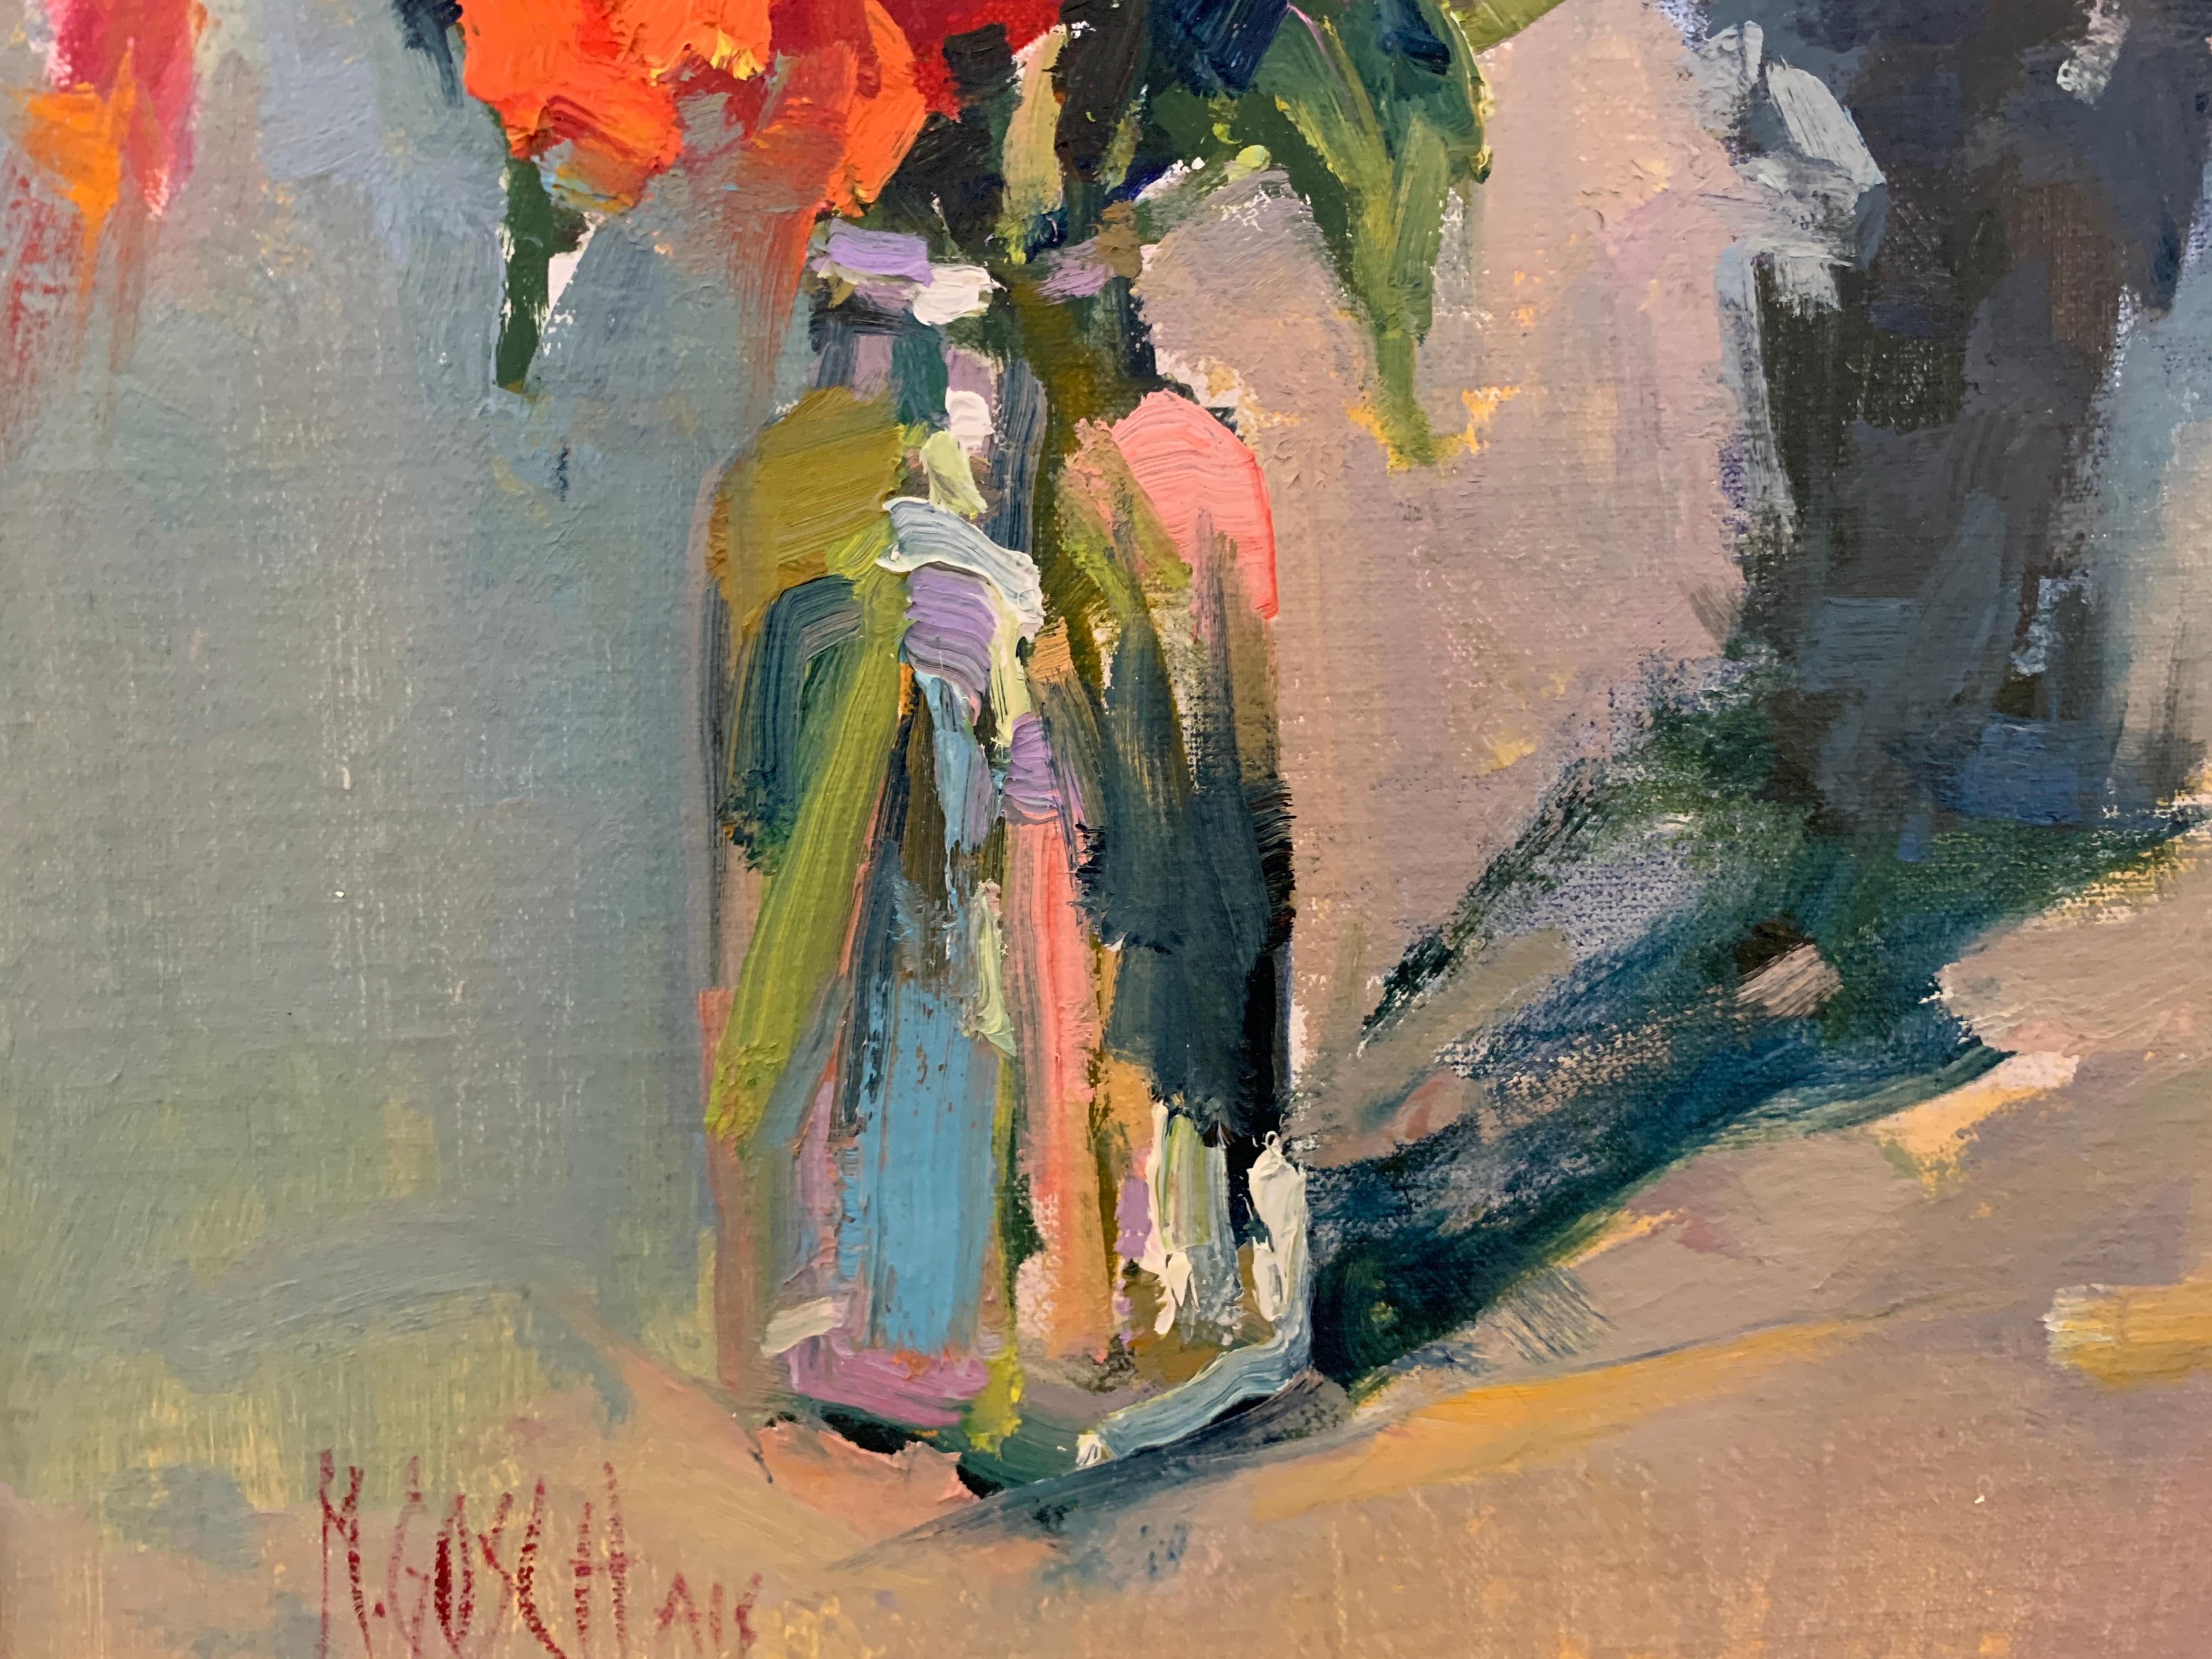 Fleurs III by Millie Gosch, Small Framed Oil on Board Still-Life Painting 1